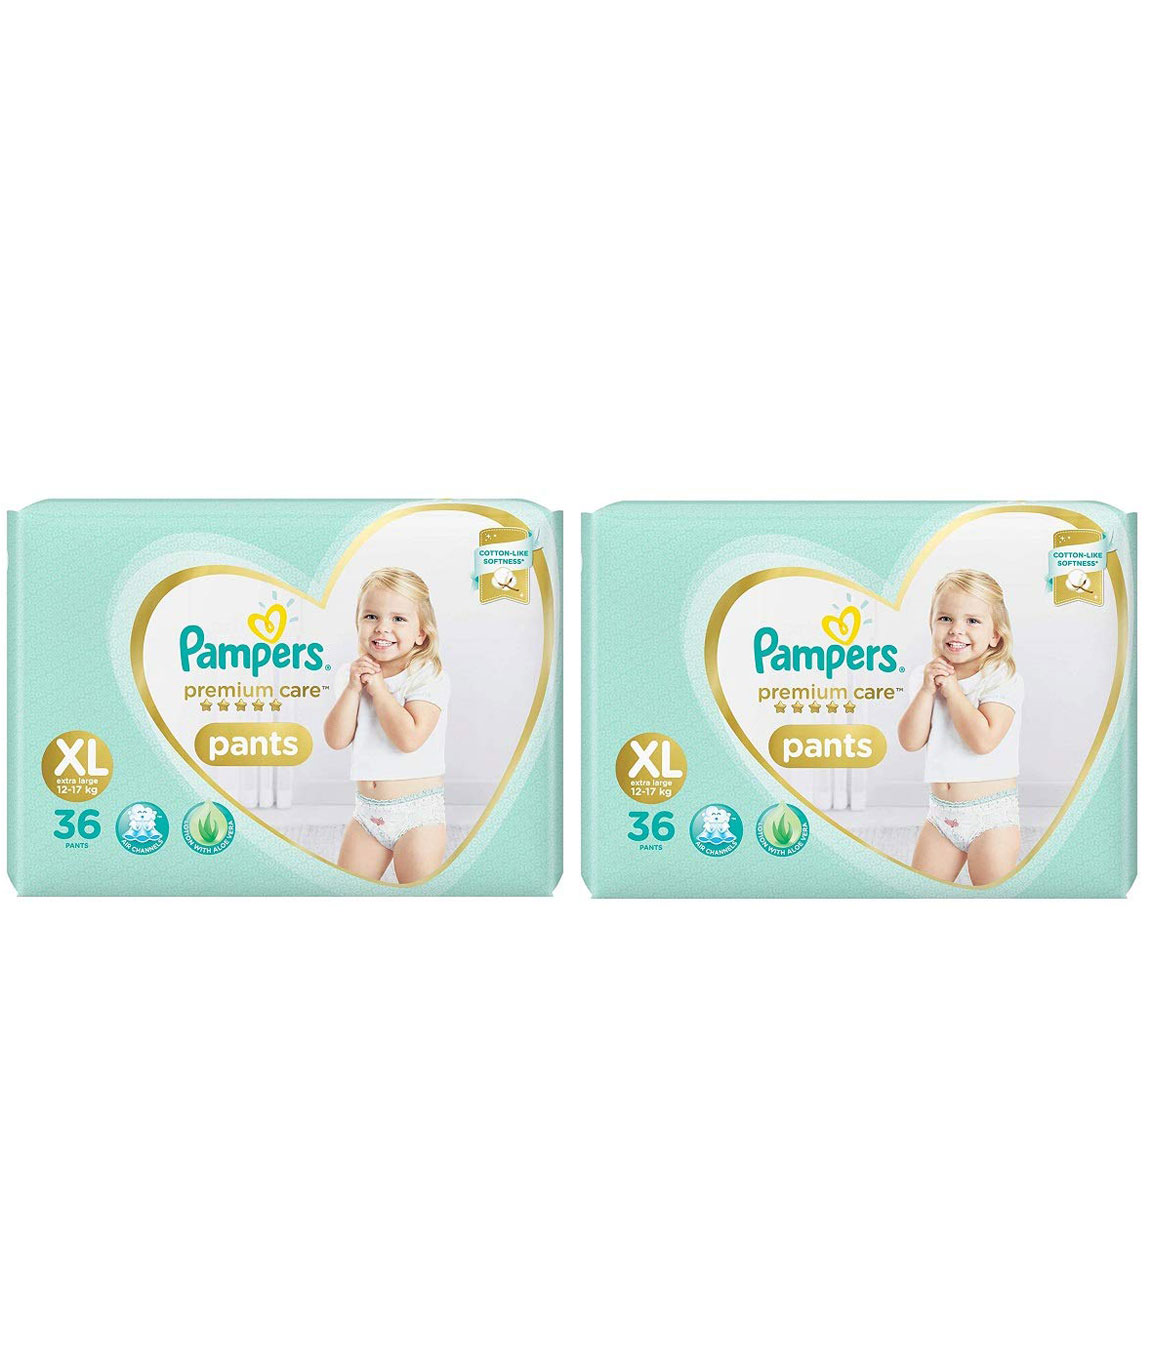 Mamy Poko Pants Extra Dry Skin Baby Diaper Pants Girl Size XL 56pcs.| Tops  Online